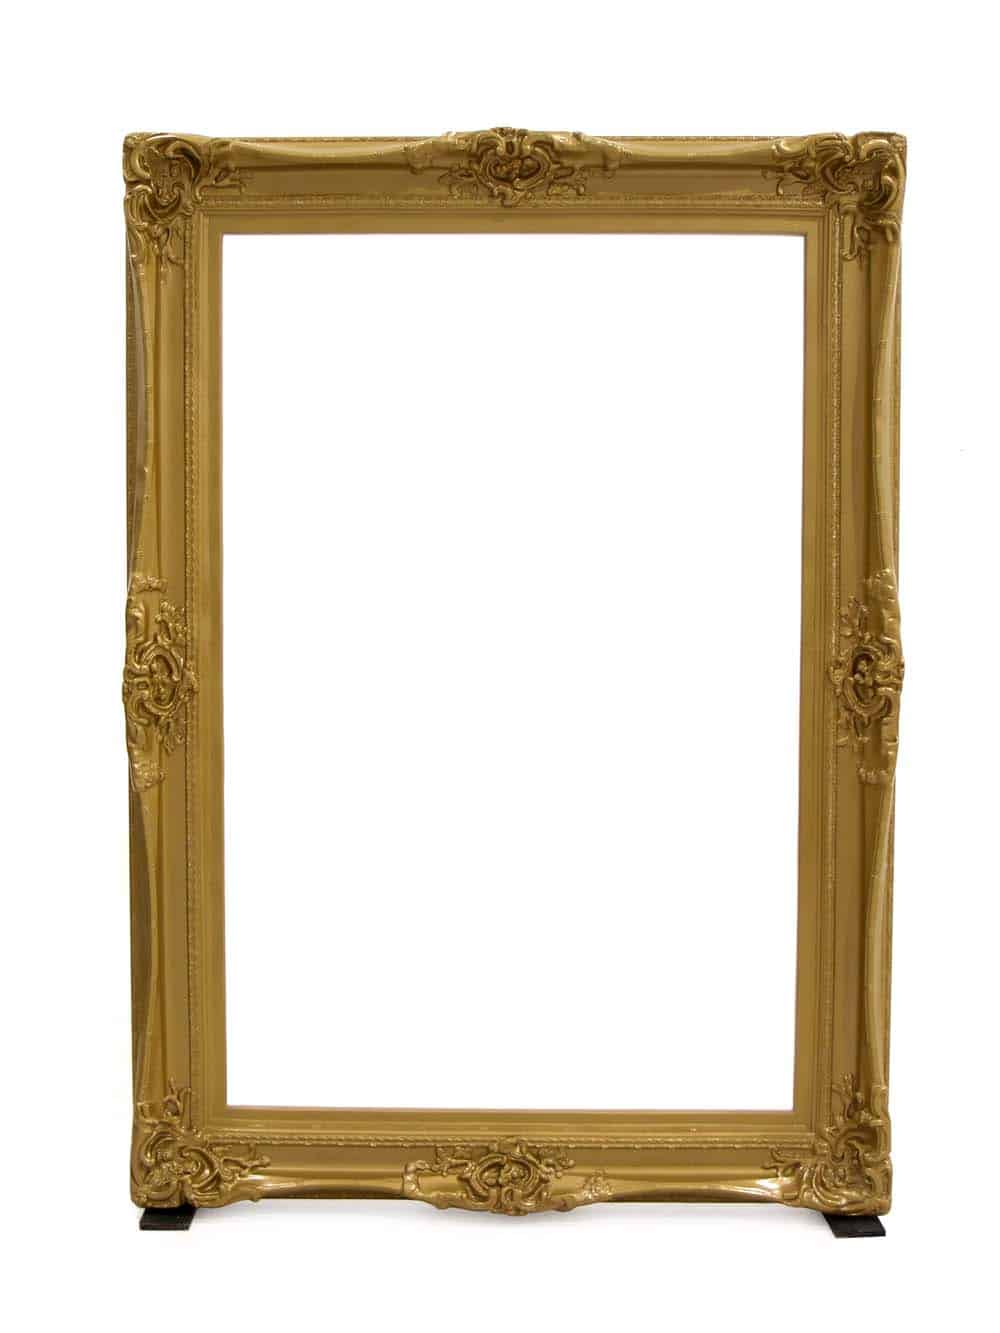 https://www.eventprophire.com/wp-content/uploads/2022/05/SN8970_Giant-Gold-Frame-NEW_event_prop_hire_EPH_Creative_510_optimised.jpg